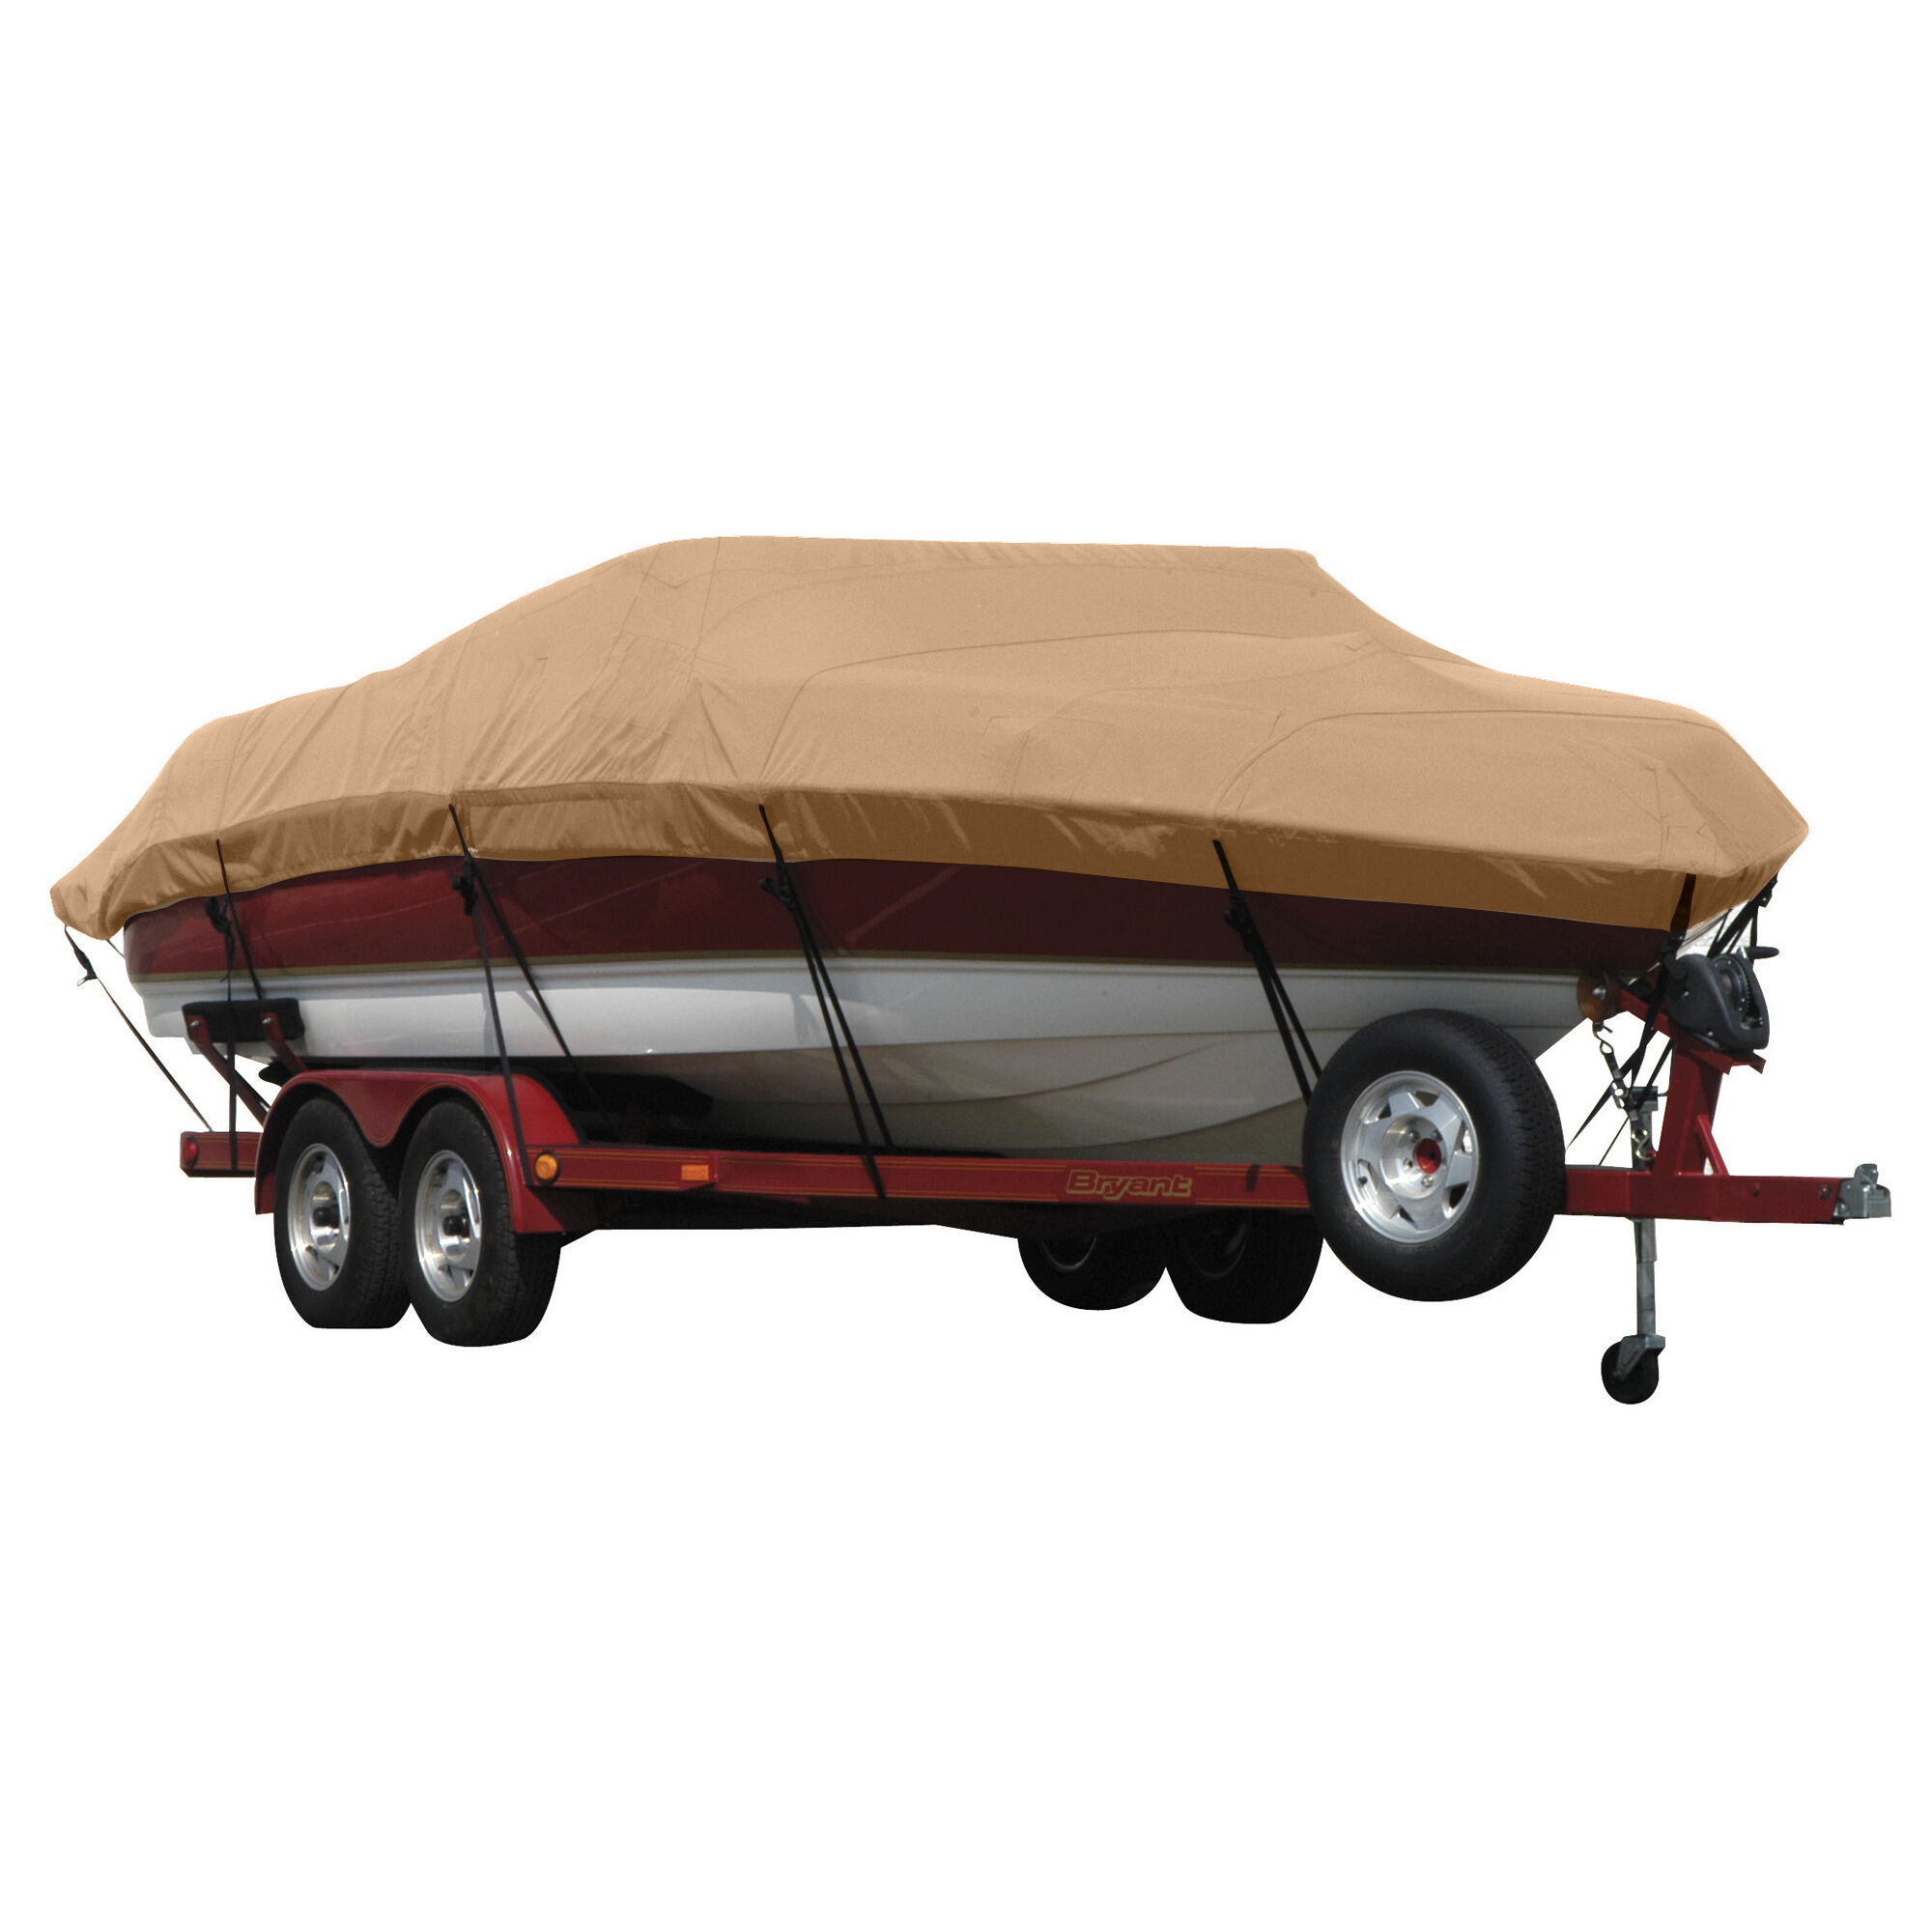 Covermate Exact Fit Sunbrella Boat Cover for Cobalt 303 303 Cruiser w/ Arch Cutouts Covers Extended Swim Platform w/ Spot Light I/O. Beige